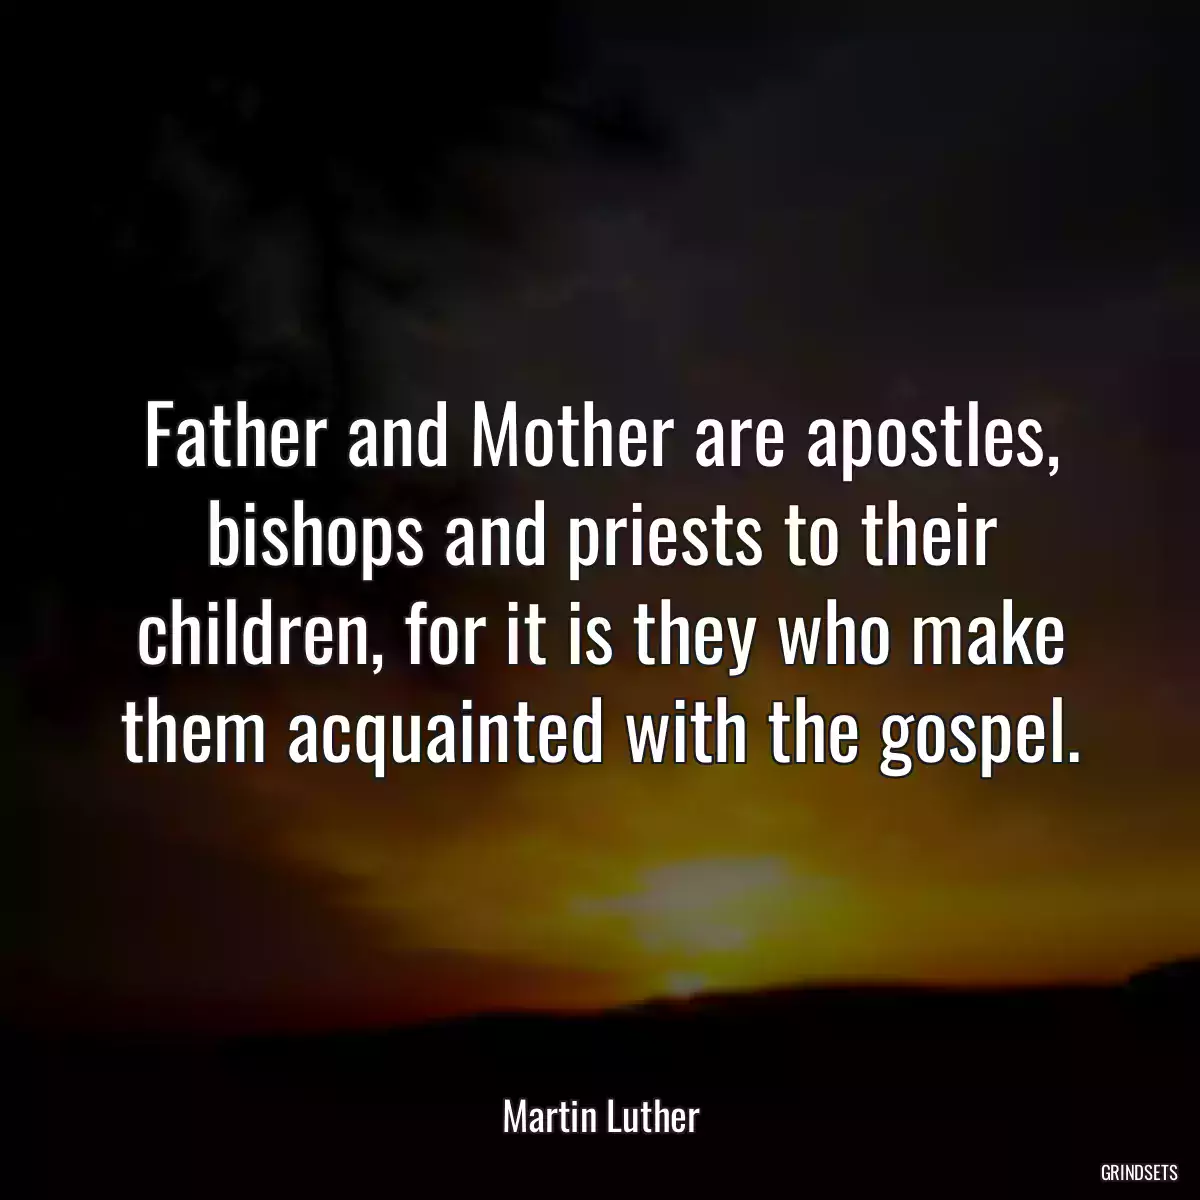 Father and Mother are apostles, bishops and priests to their children, for it is they who make them acquainted with the gospel.